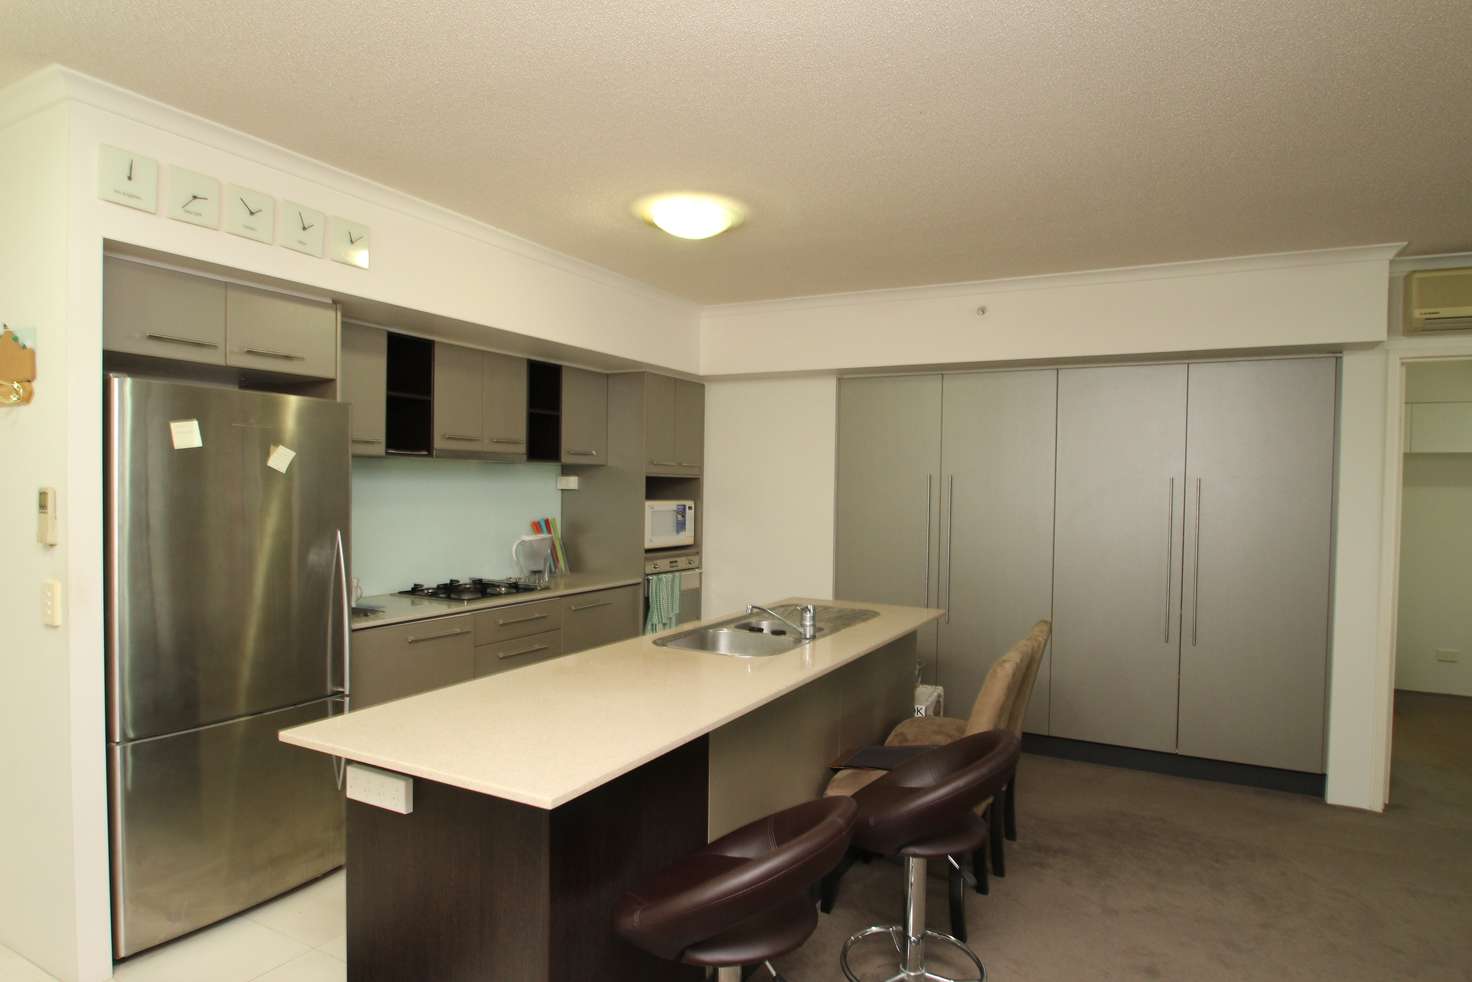 Main view of Homely apartment listing, 2304/79 Albert Street, Brisbane City QLD 4000